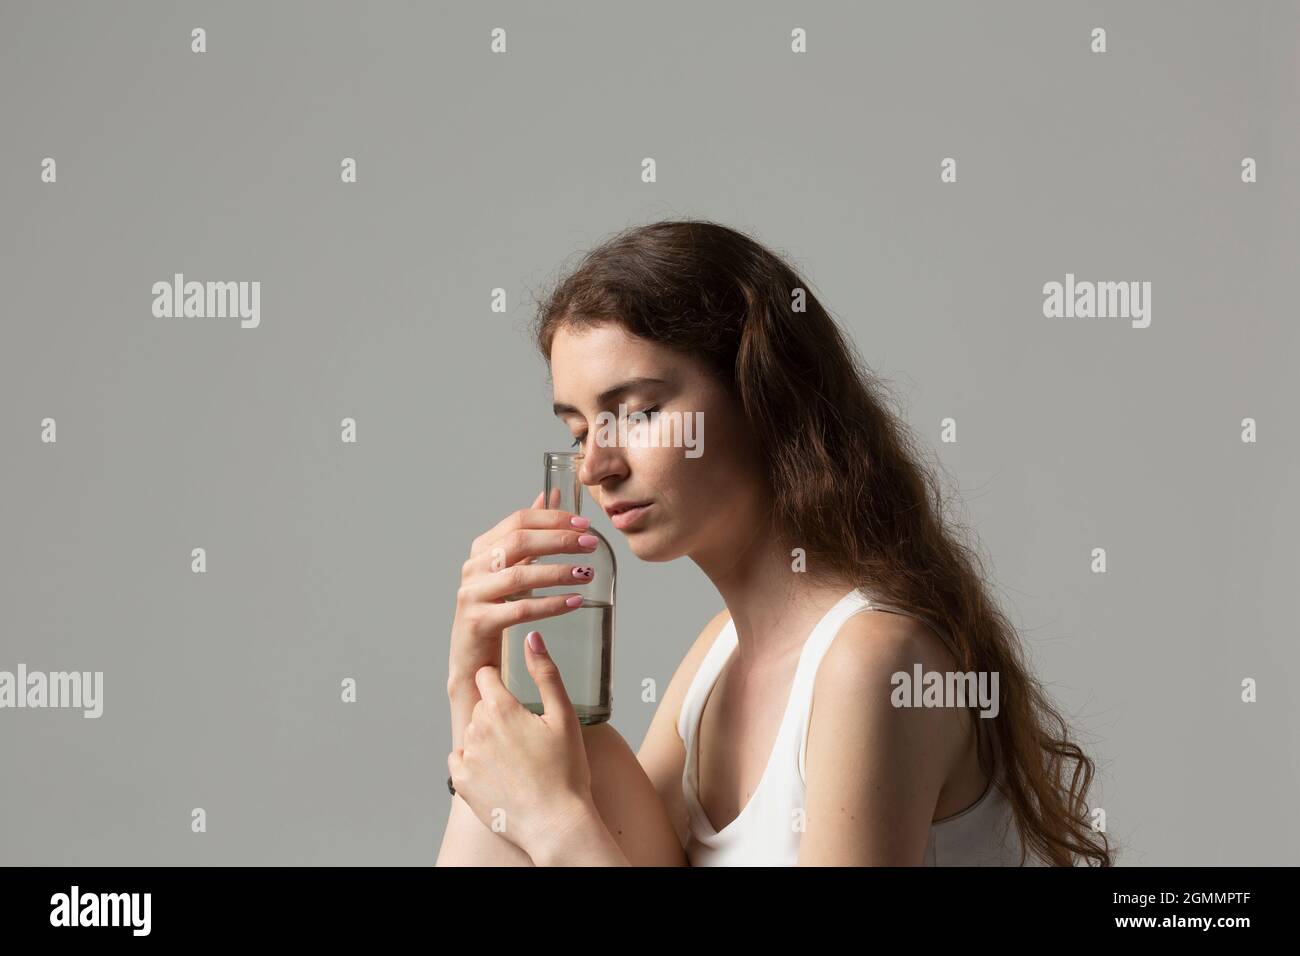 Serene young woman holding bottle of water Stock Photo